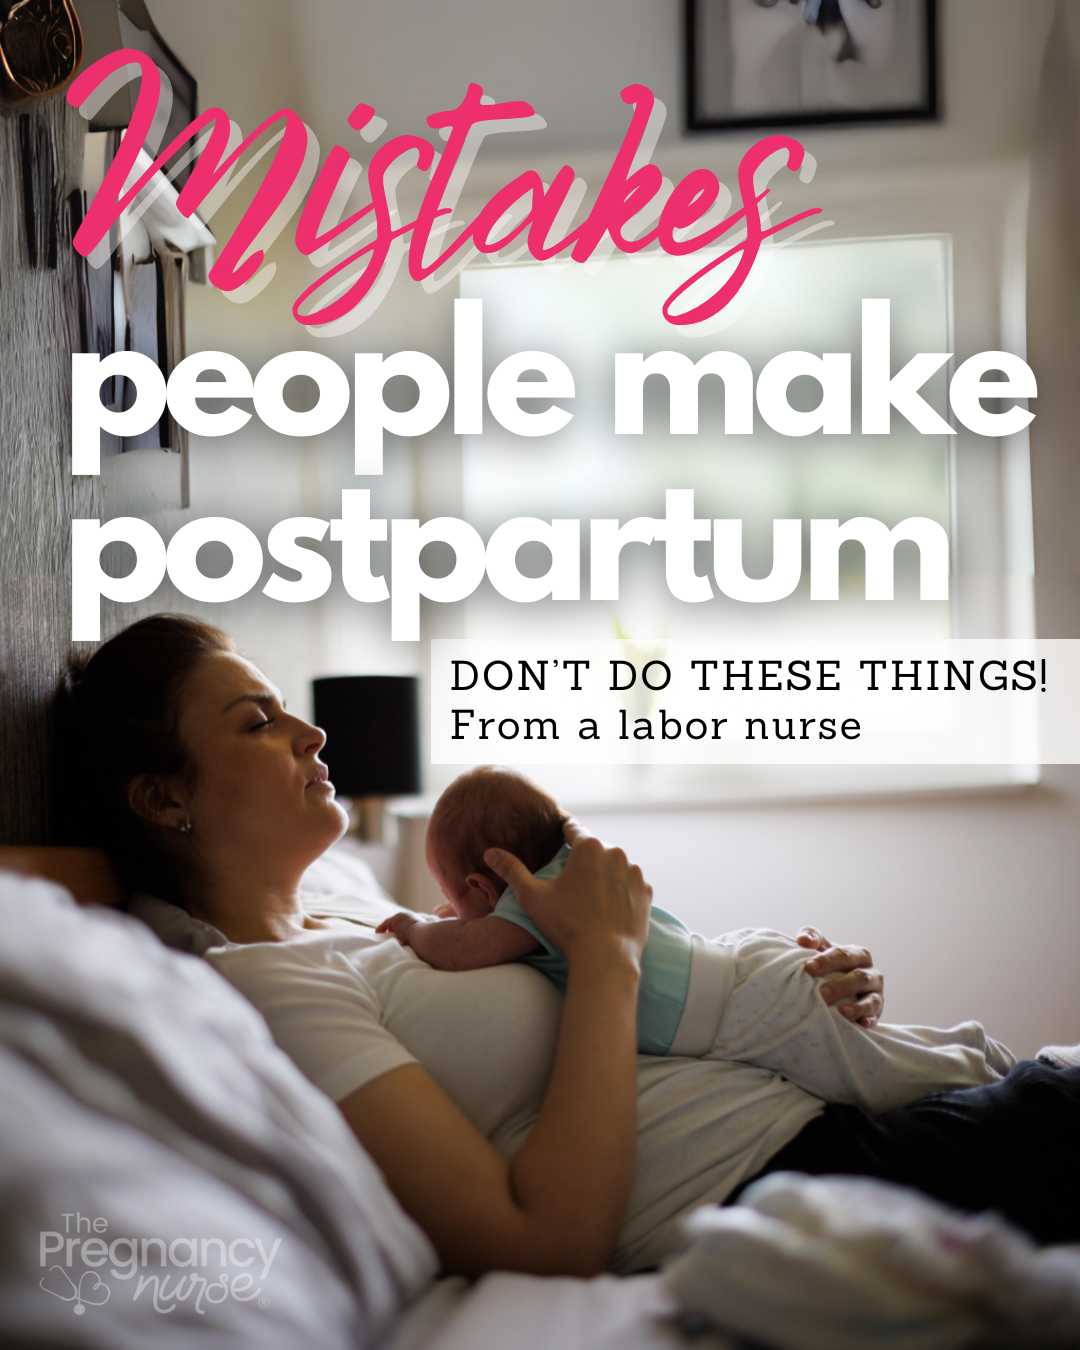 mom and newborn baby postpartum // mistakes people make postarptum (don't do these things from a labor nurse)